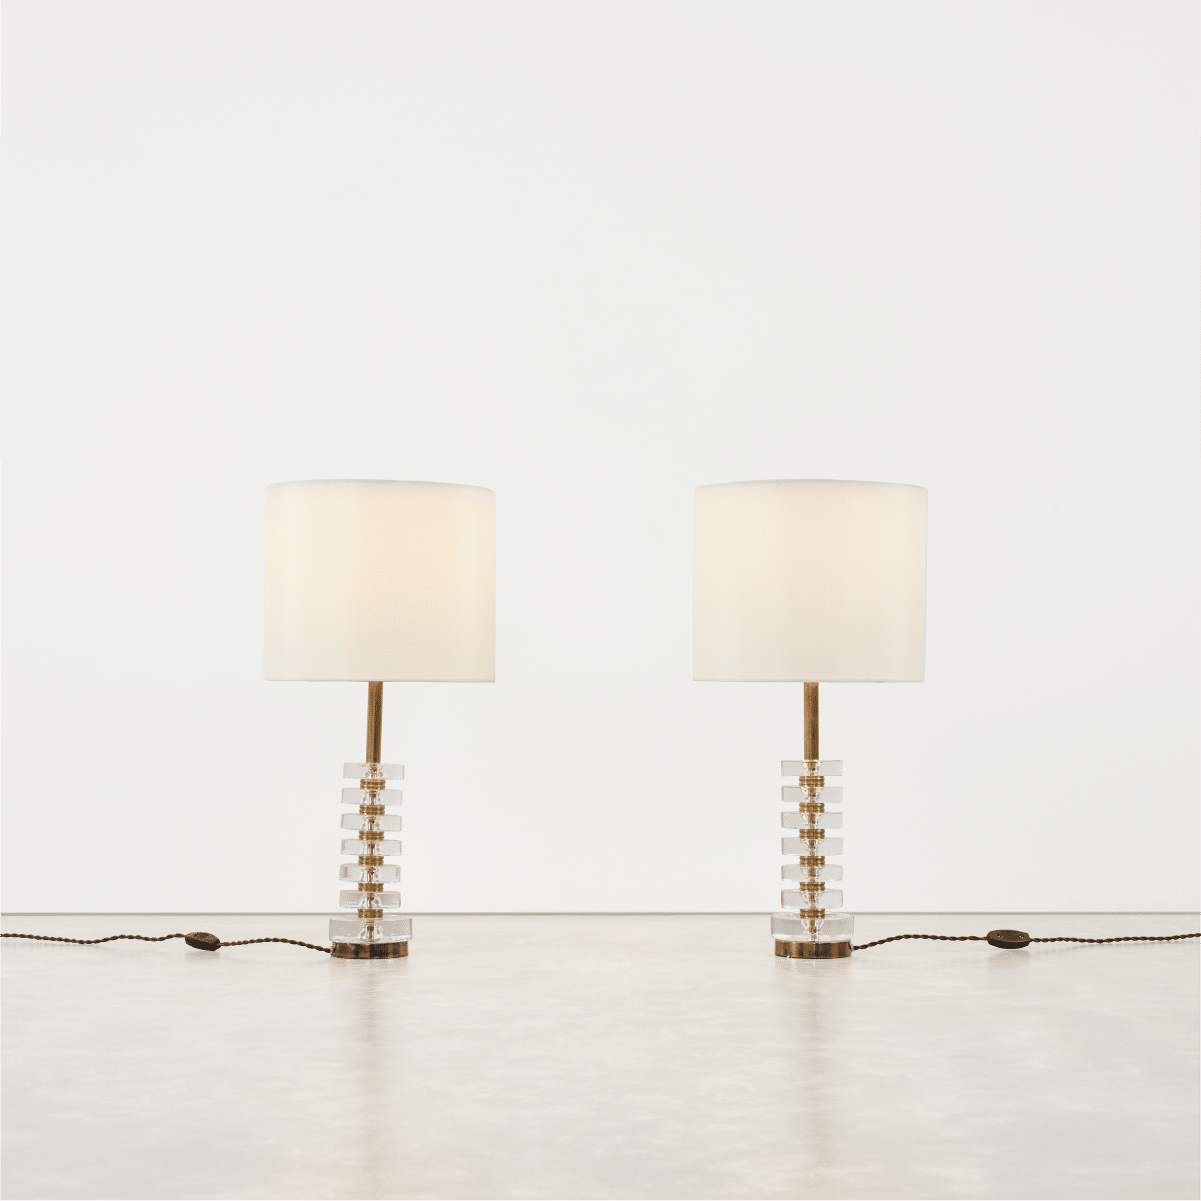 Low res for web_Pair of Crystal Table Lamps-